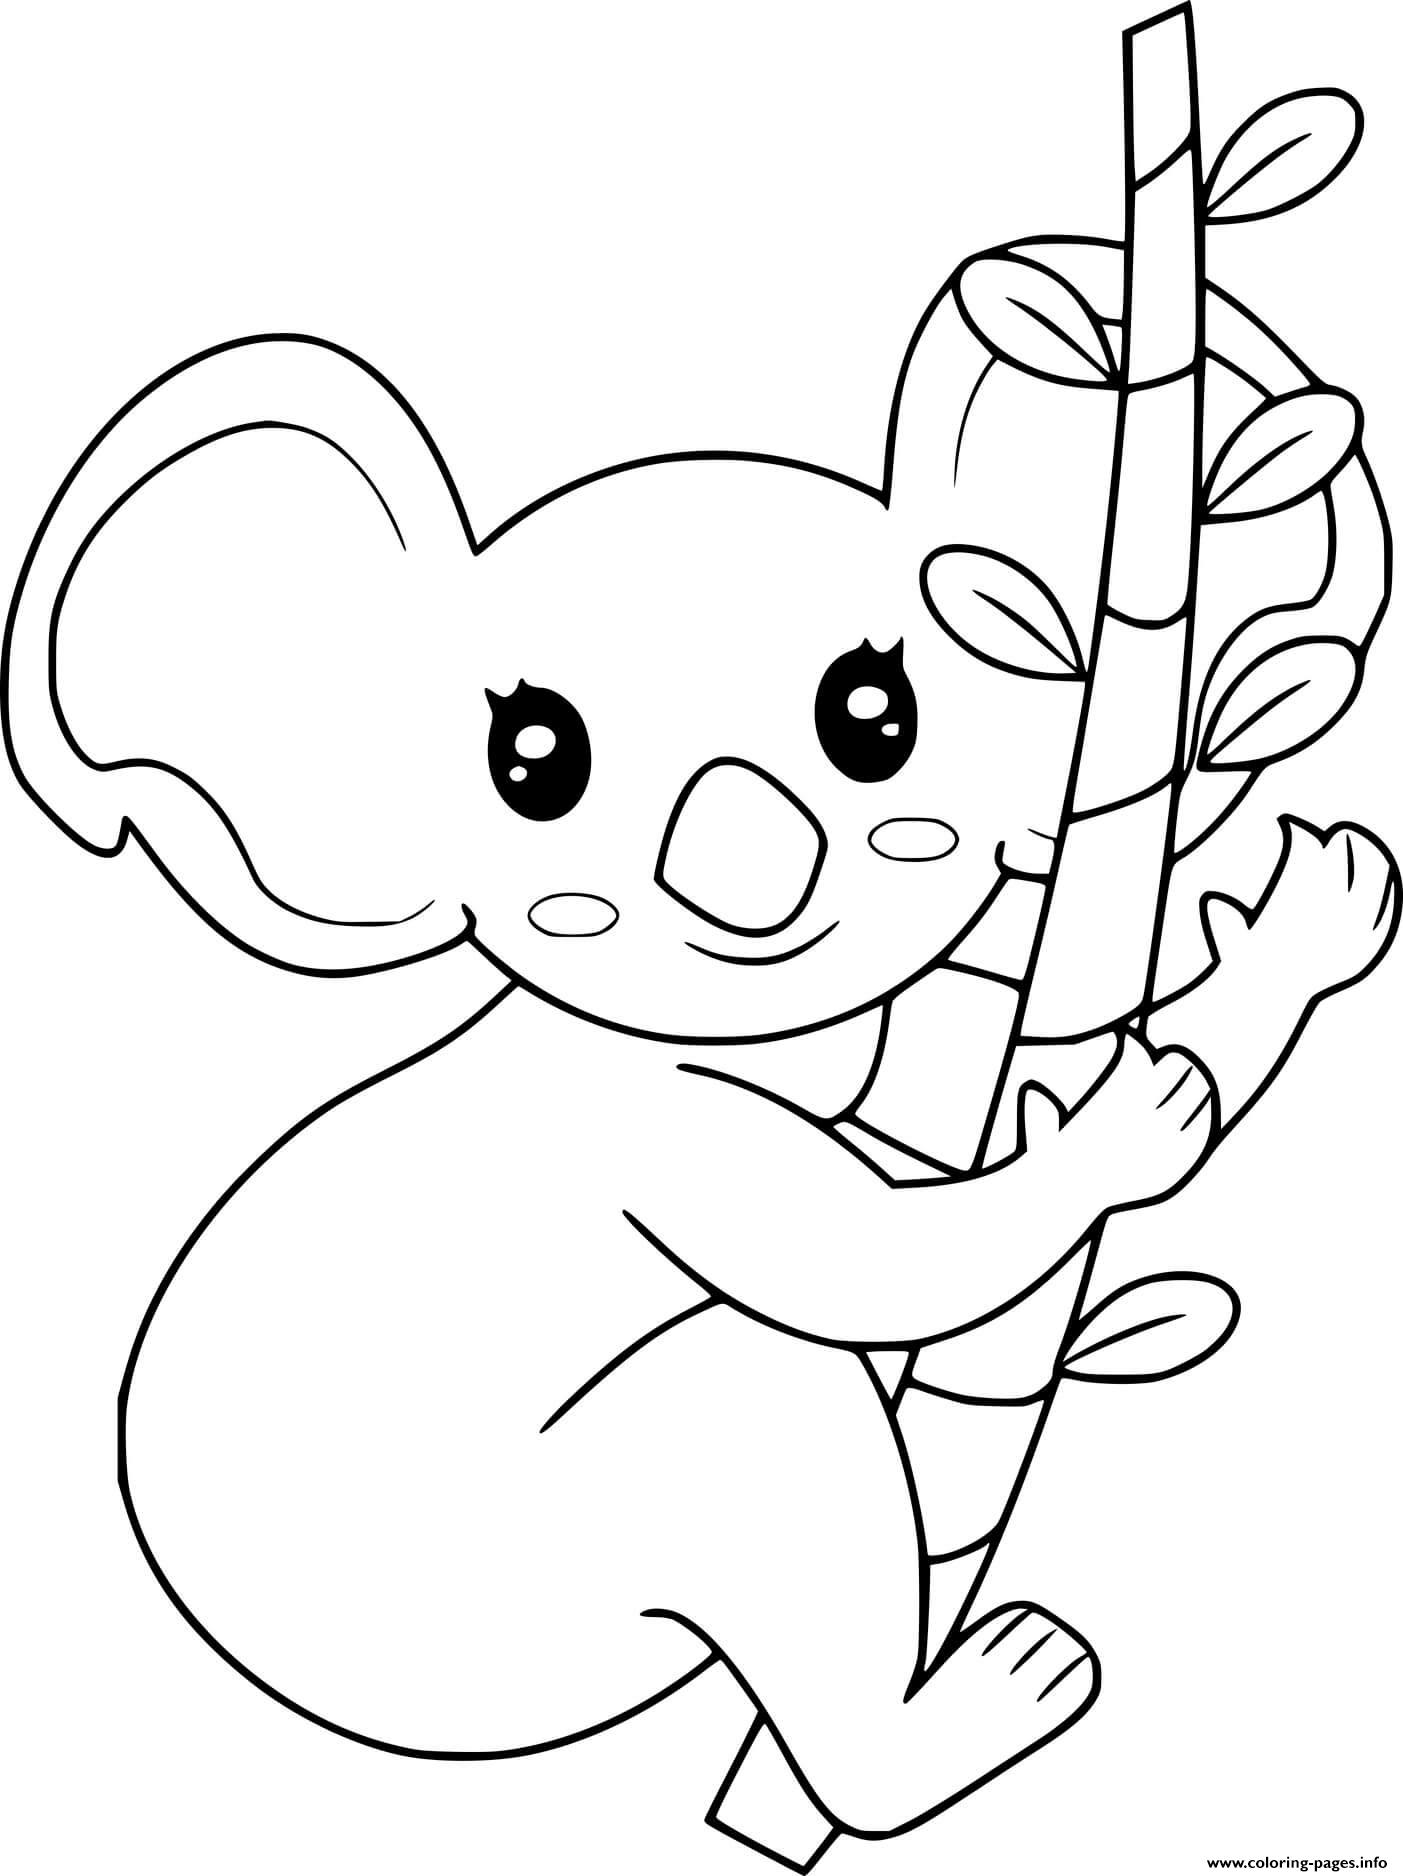 Koala Holds The Branch coloring